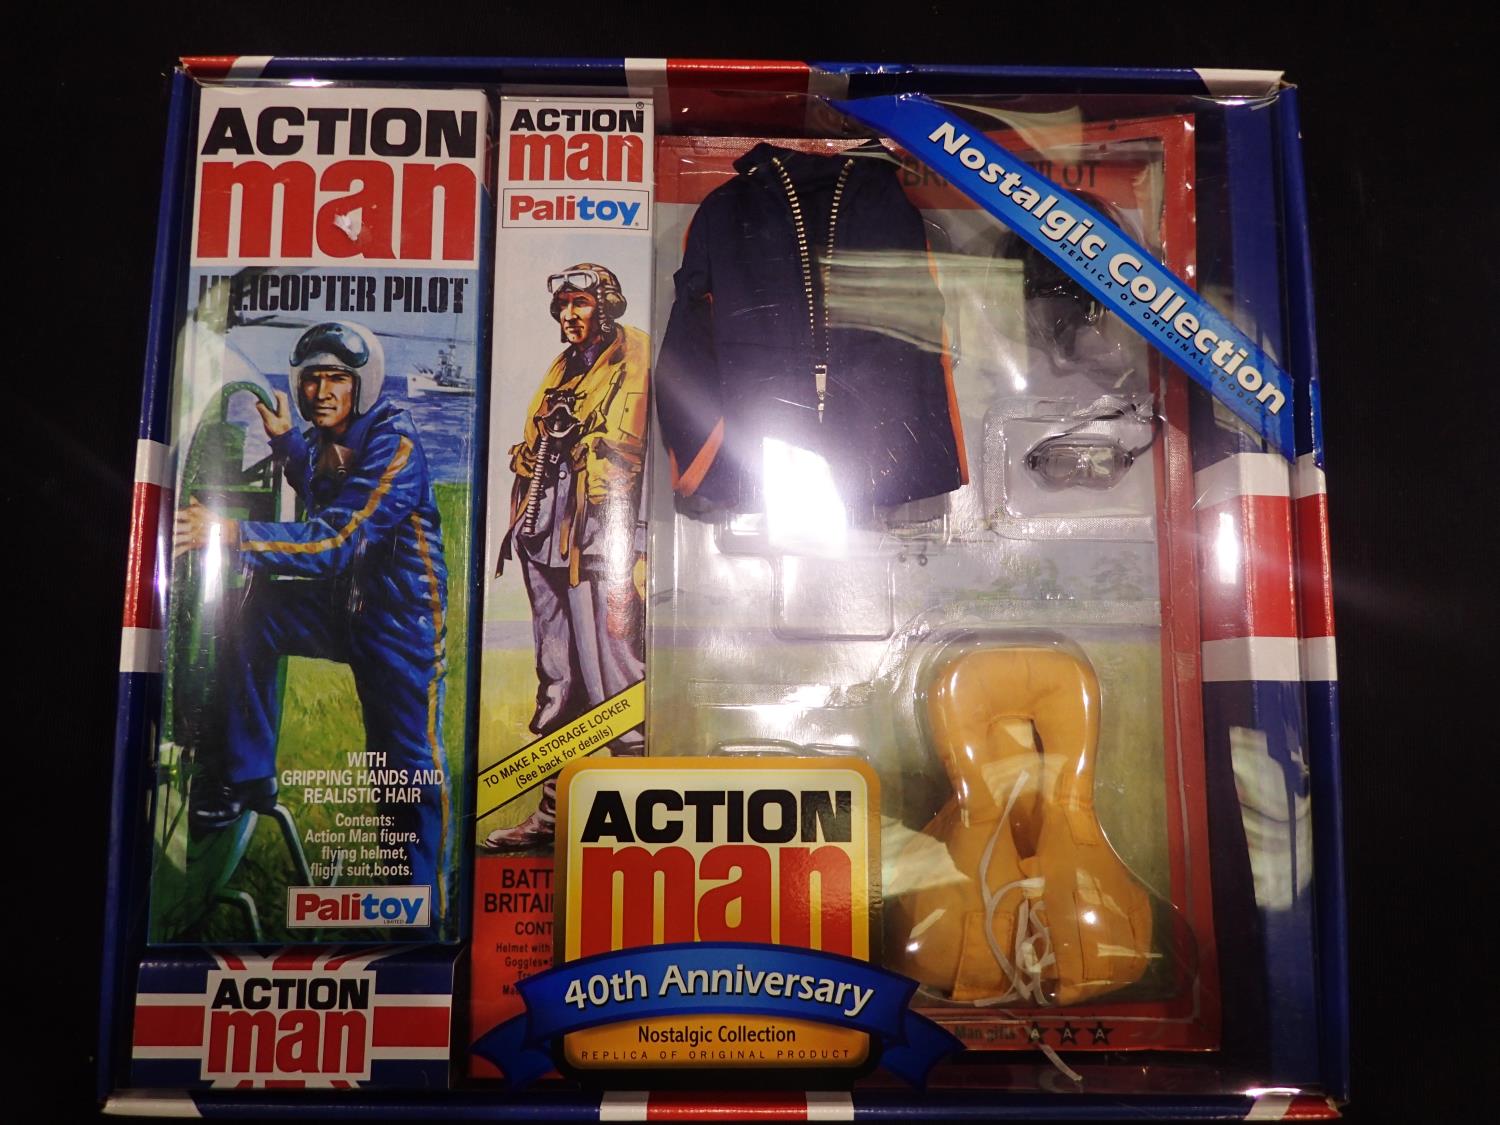 Action Man 40th anniversary nostalgic collection, helicopter pilot figure and Battle of Britain